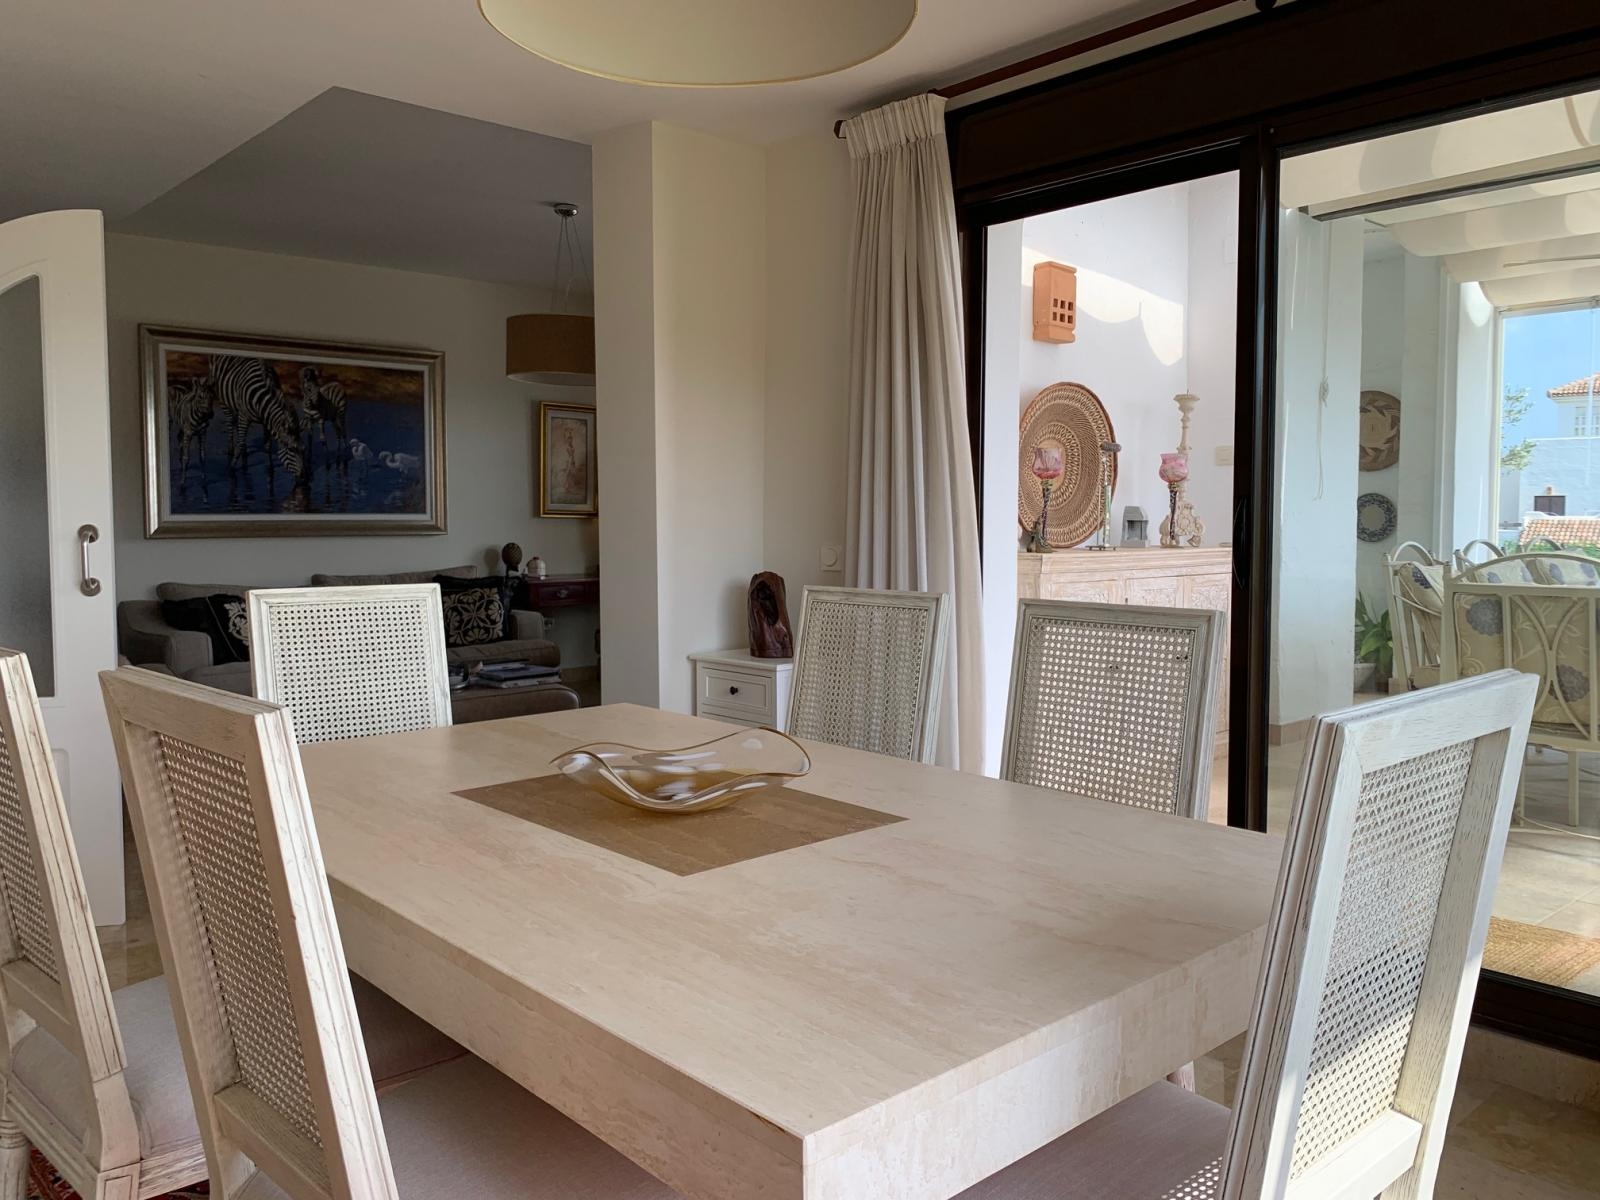 Splendid townhouse with spectacular views in Alcaidesa